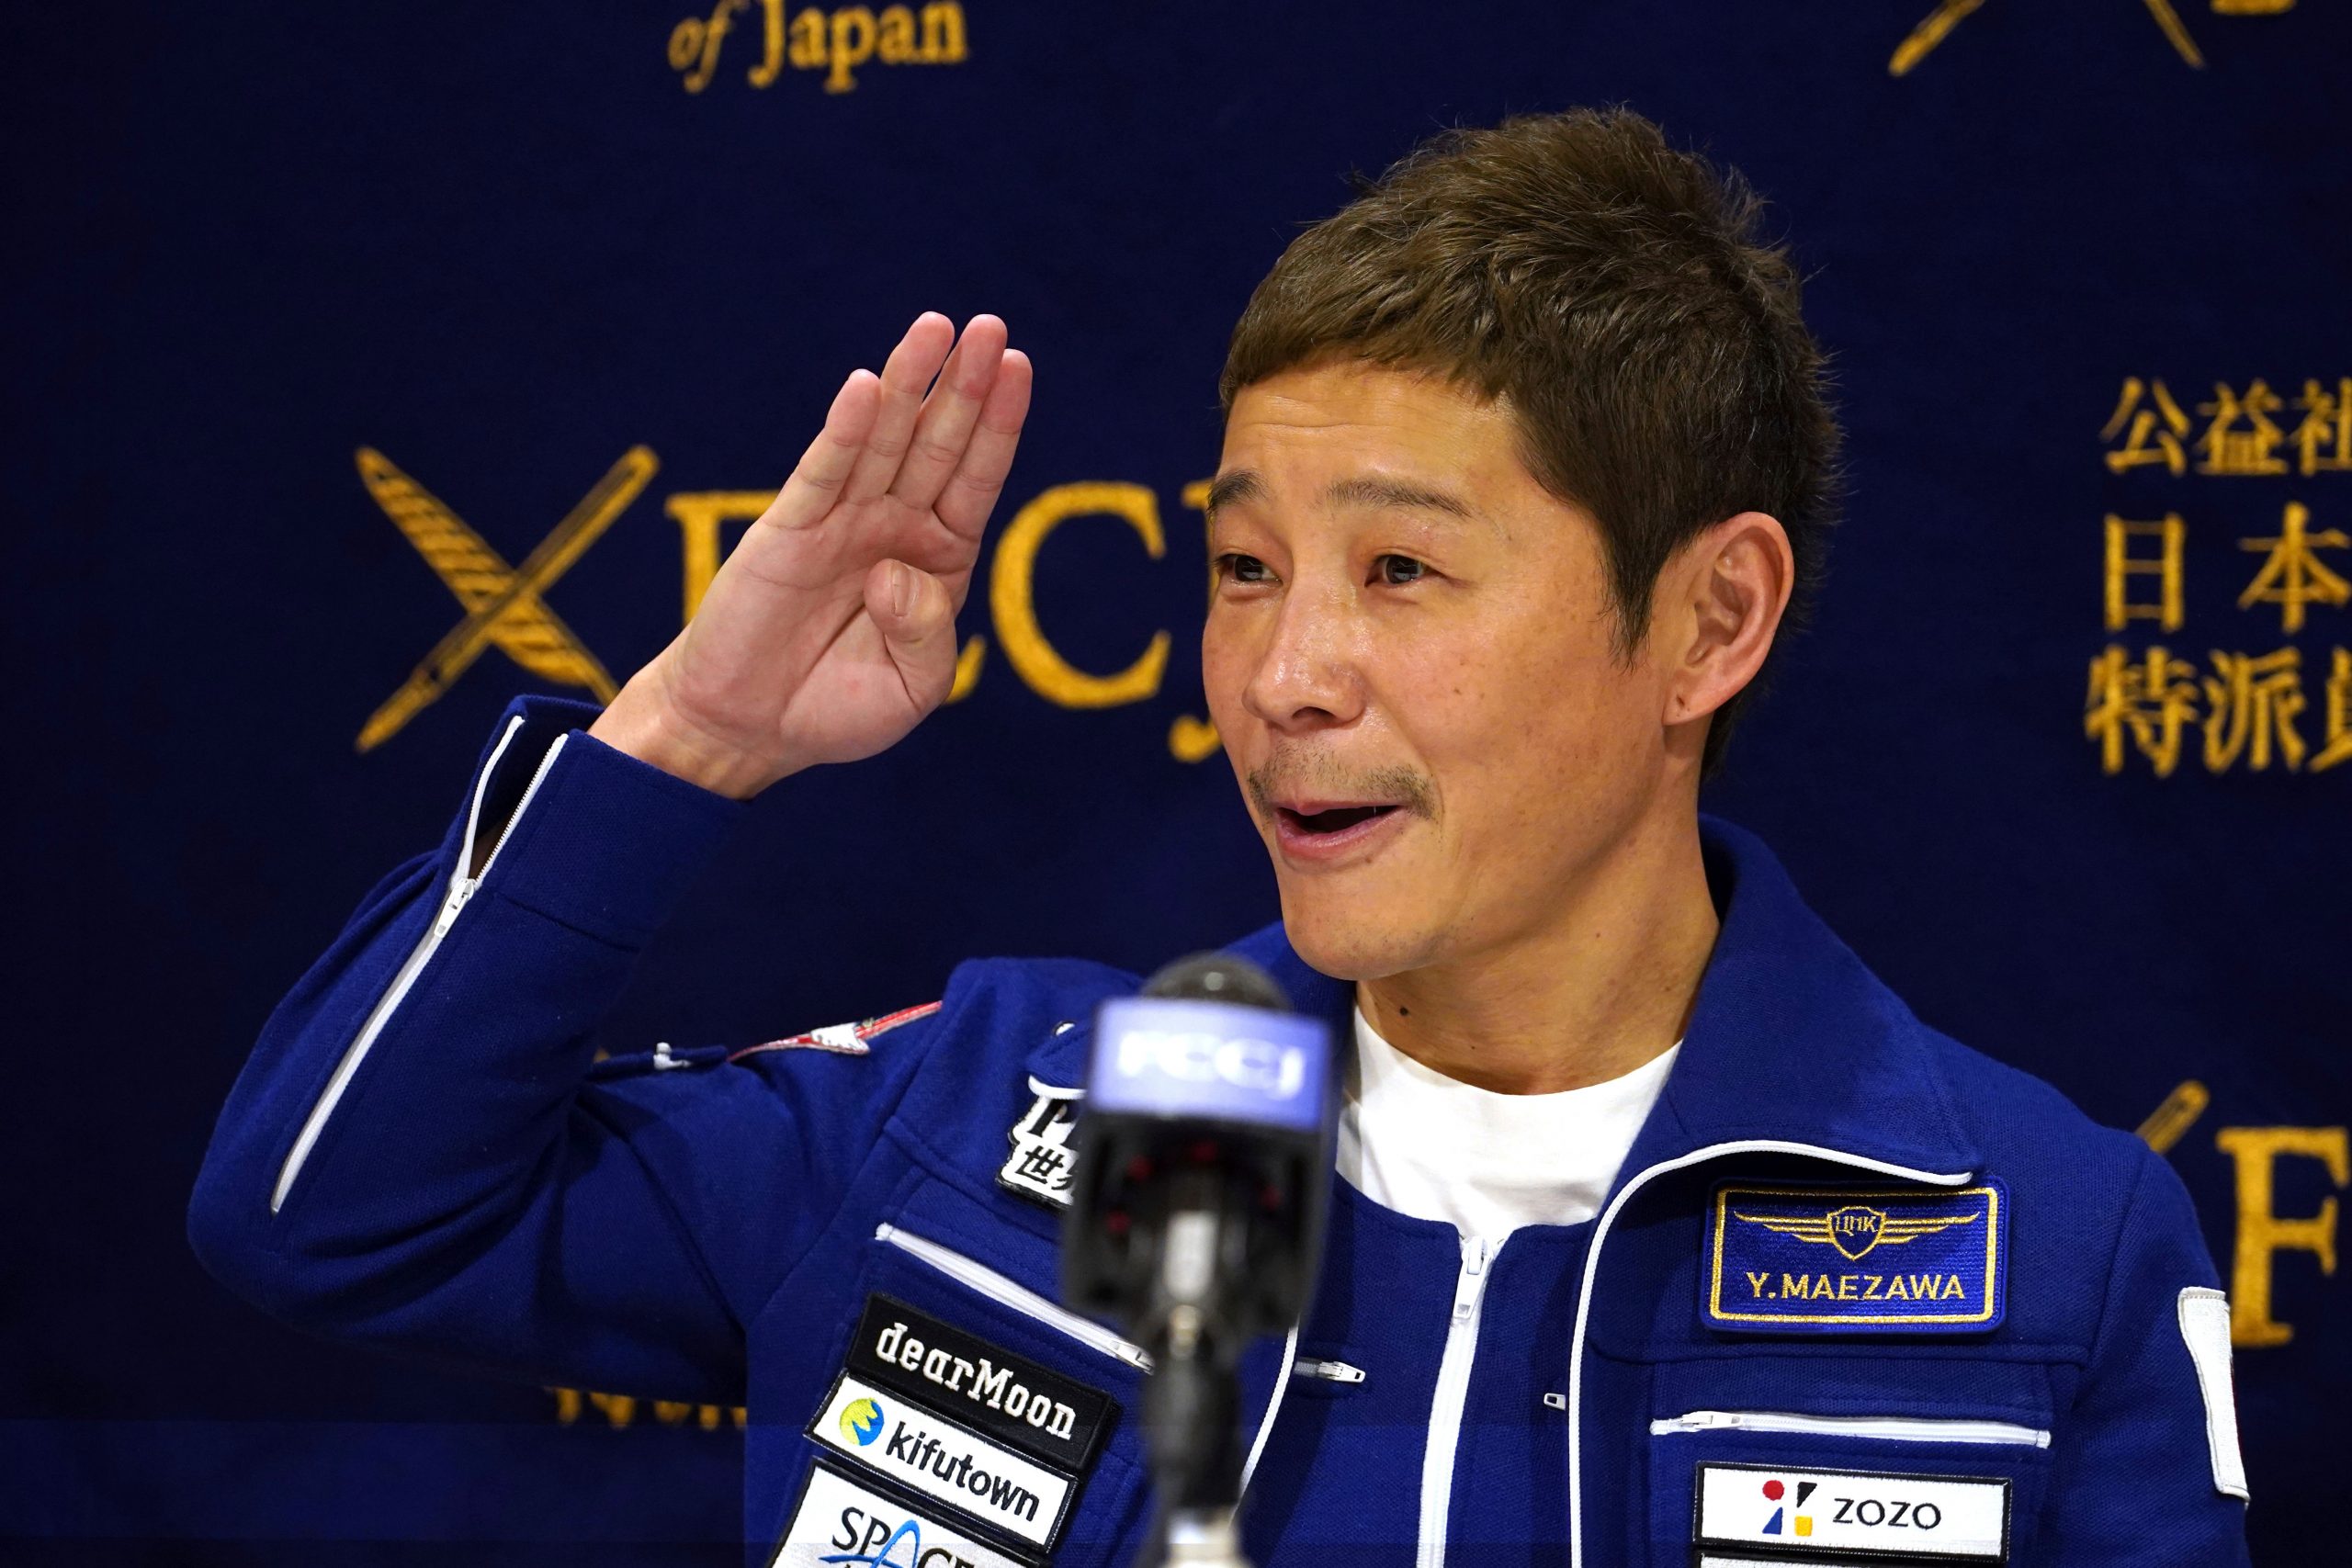 Japan tycoon Yusaku Maezawa returns from space with business dreams